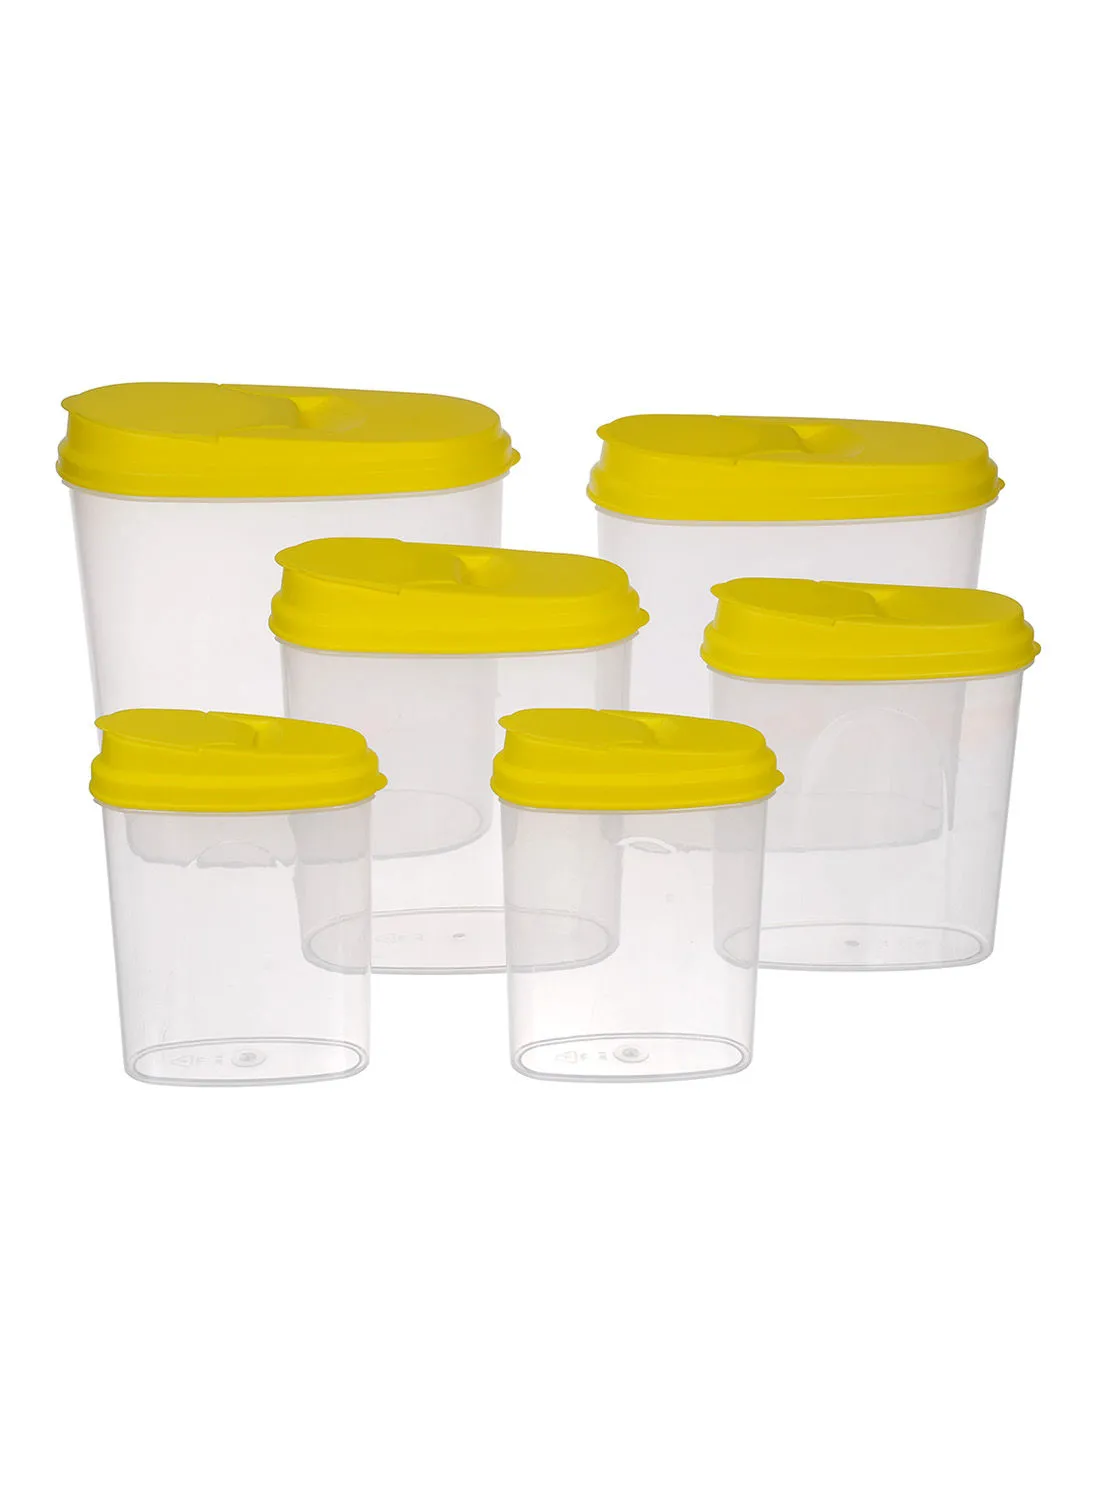 Amal 6 Piece Plastic Food Container Set - Easy Pour Lids - Food Storage Box - Storage Boxes - Kitchen Cabinet Organizers - Yellow